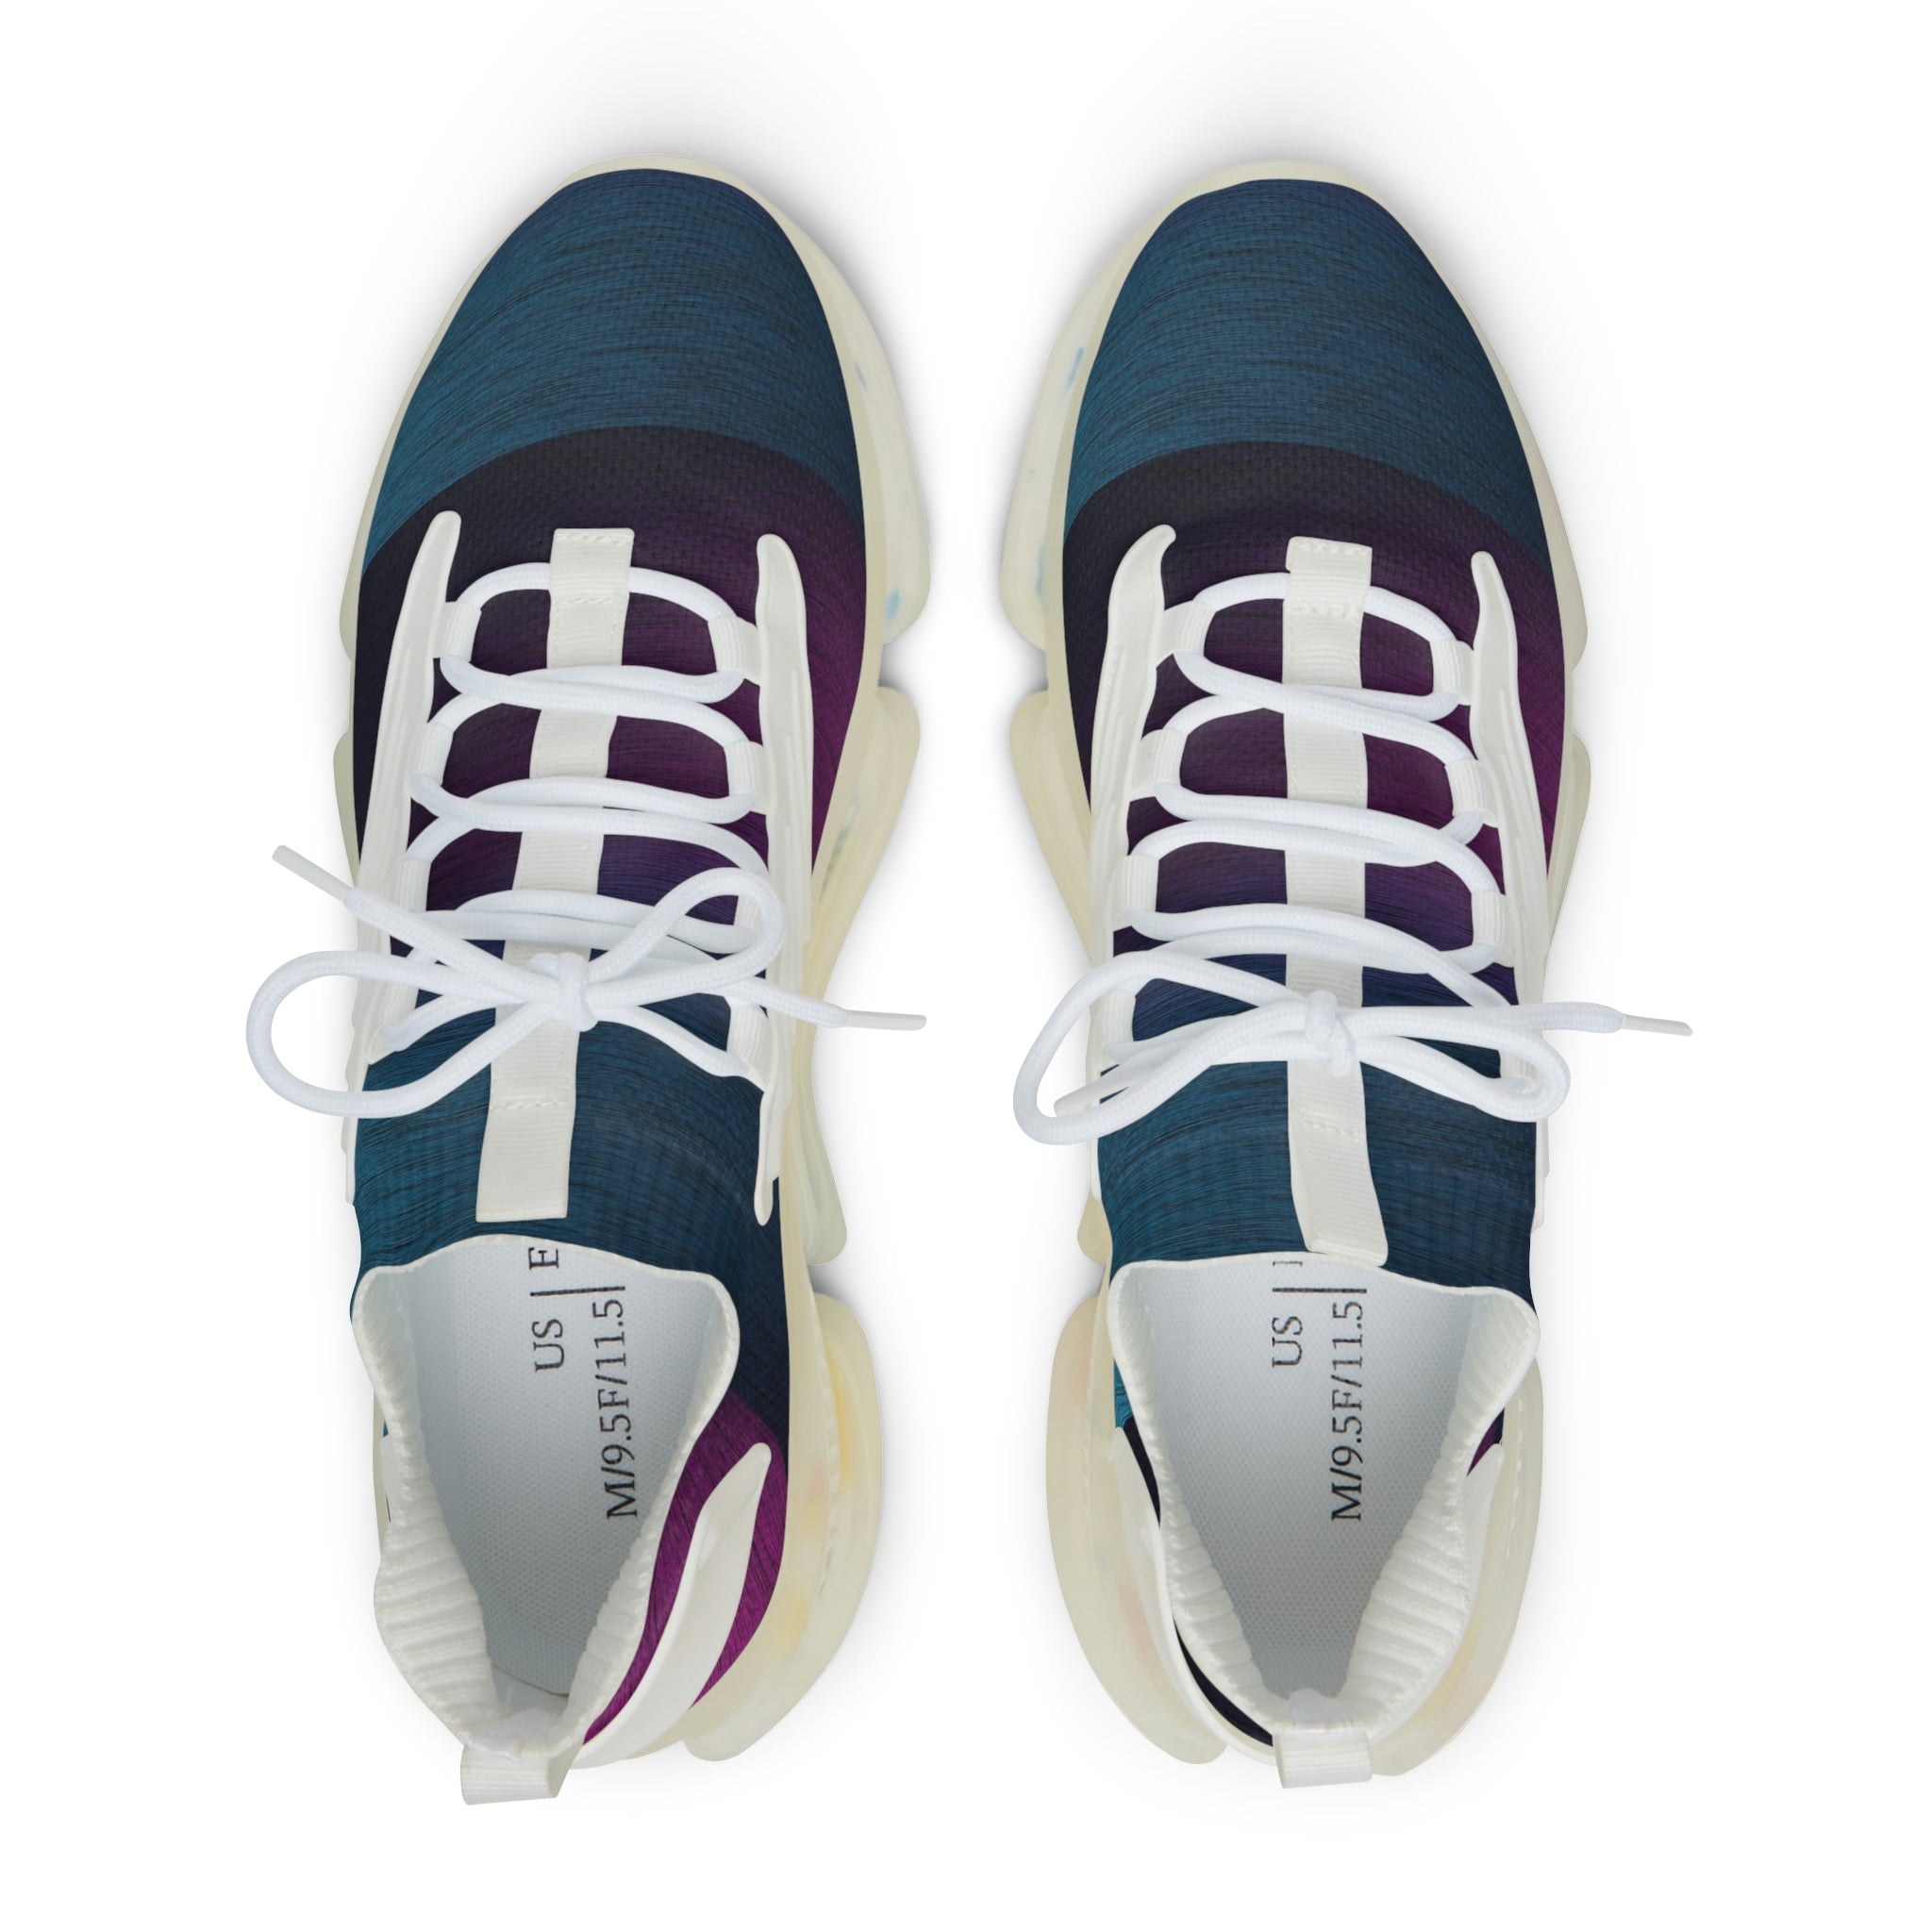 Anacotte Men's Mesh Sneakers - The Perfect Blend of Style and Breathability